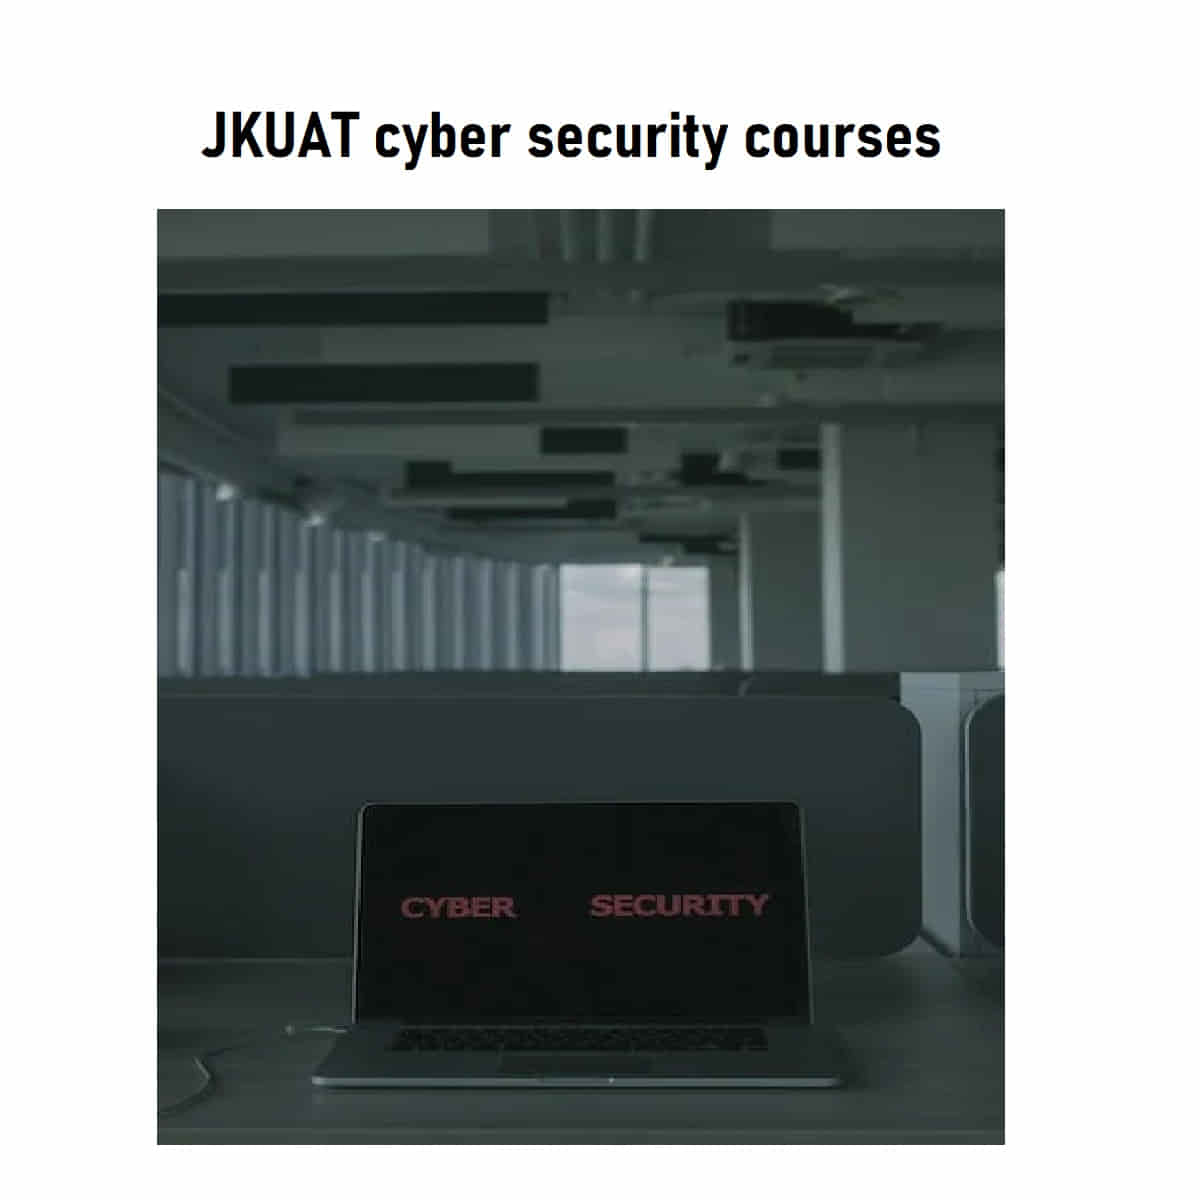 JKUAT cyber security courses